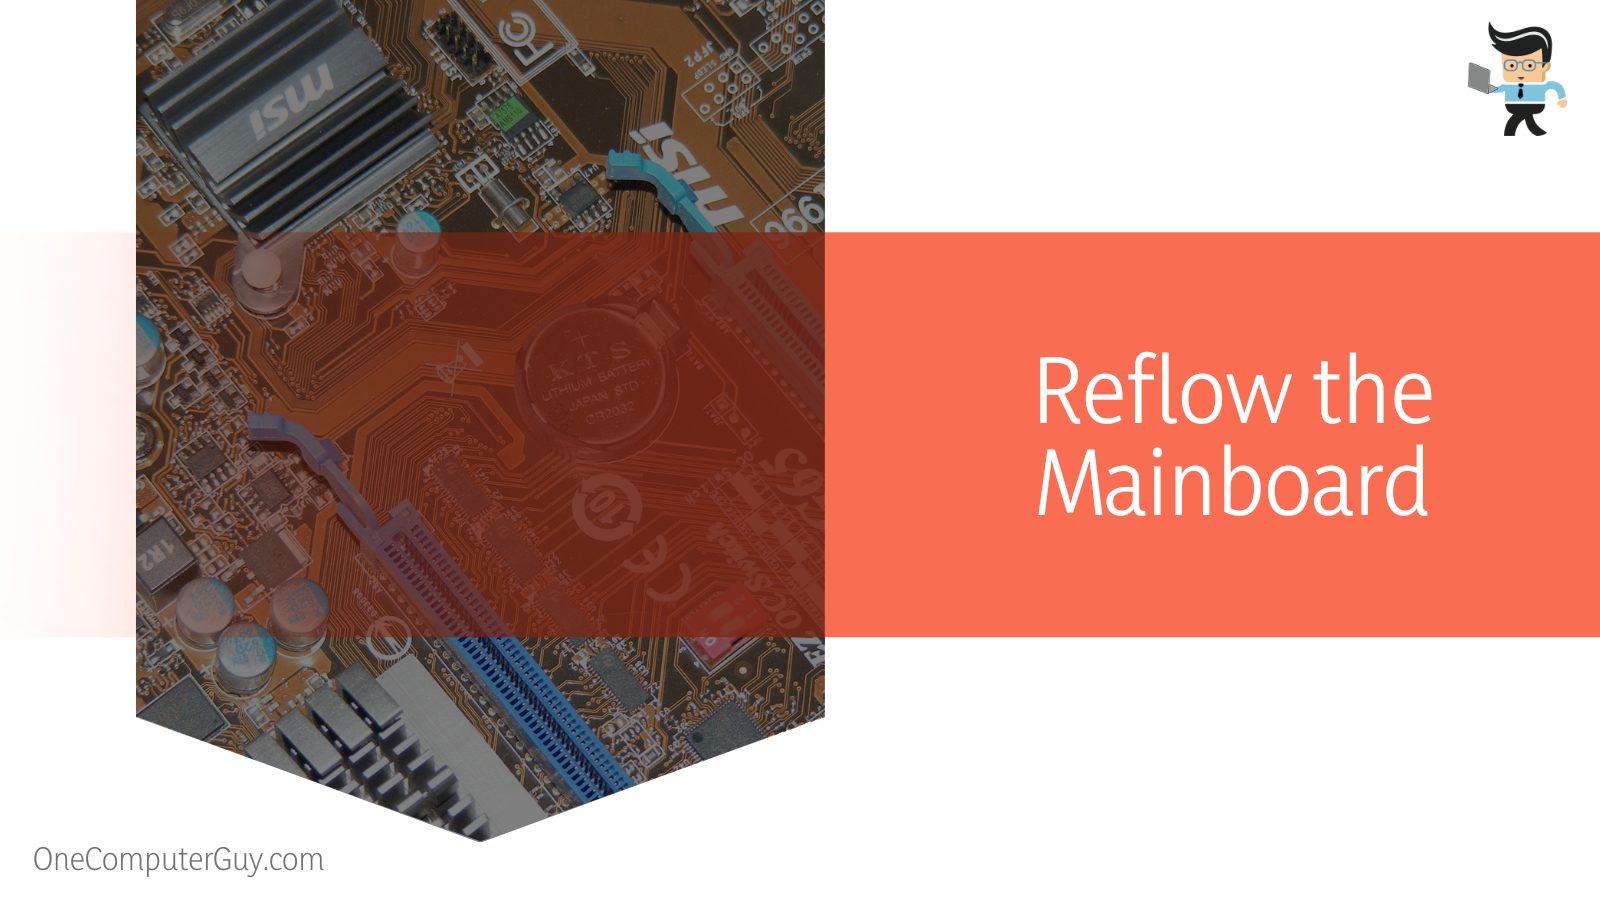 Reflow the Mainboard